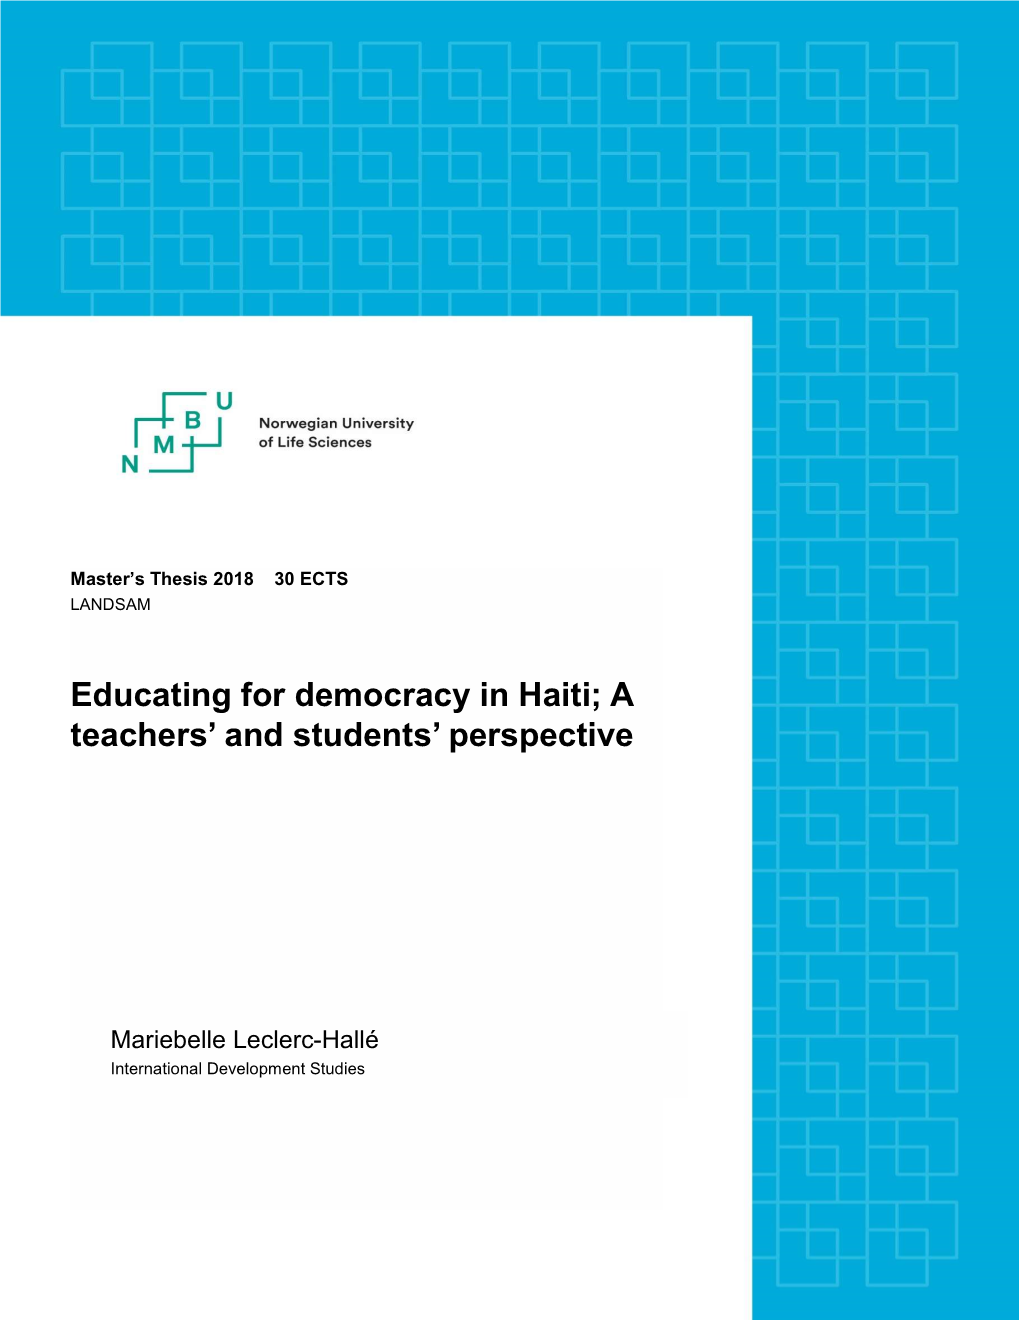 Educating for Democracy in Haiti; a Teachers' and Students' Perspective